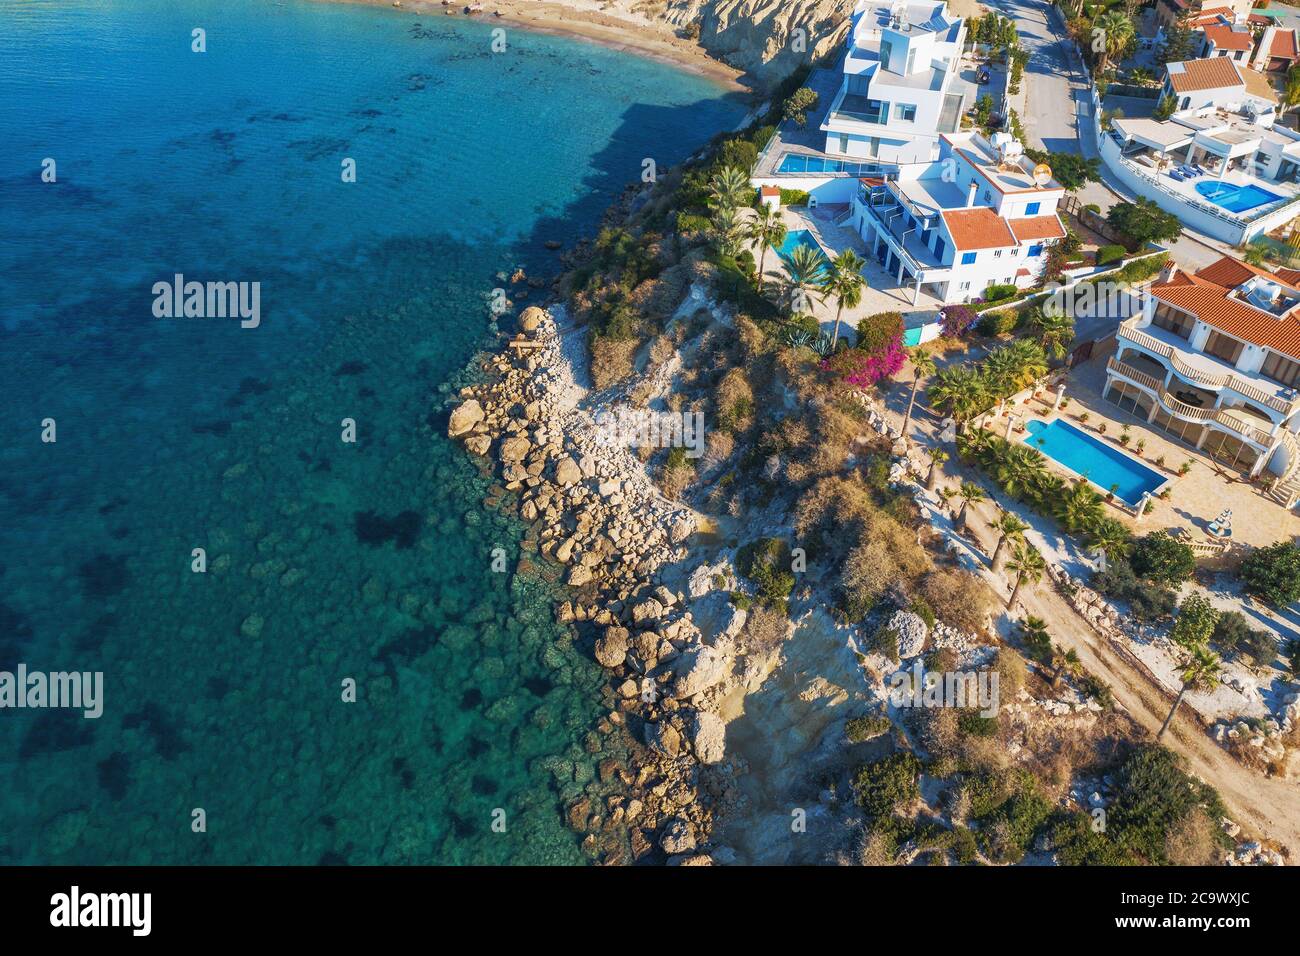 Aerial view of Cyprus coastline with new modern buildings and villas and blue sea. Stock Photo